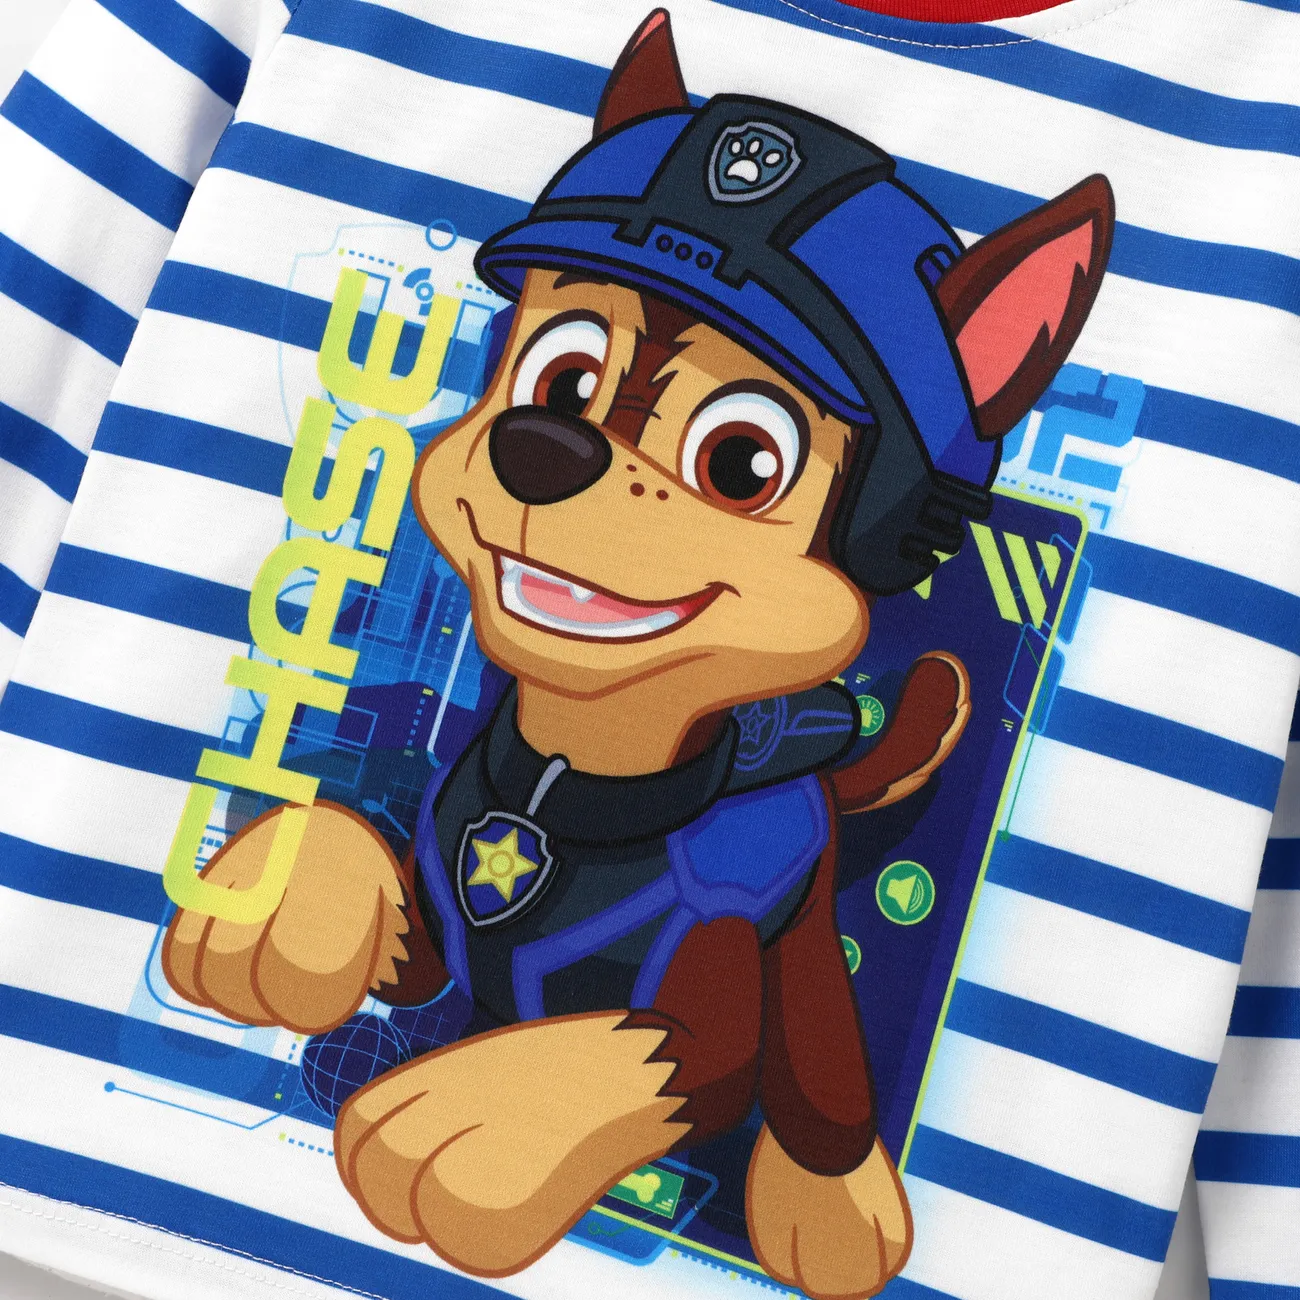 PAW Patrol Toddler Boy Embroidered Character Jacket or Sweatshirt and Pants Set  Multi-color big image 1